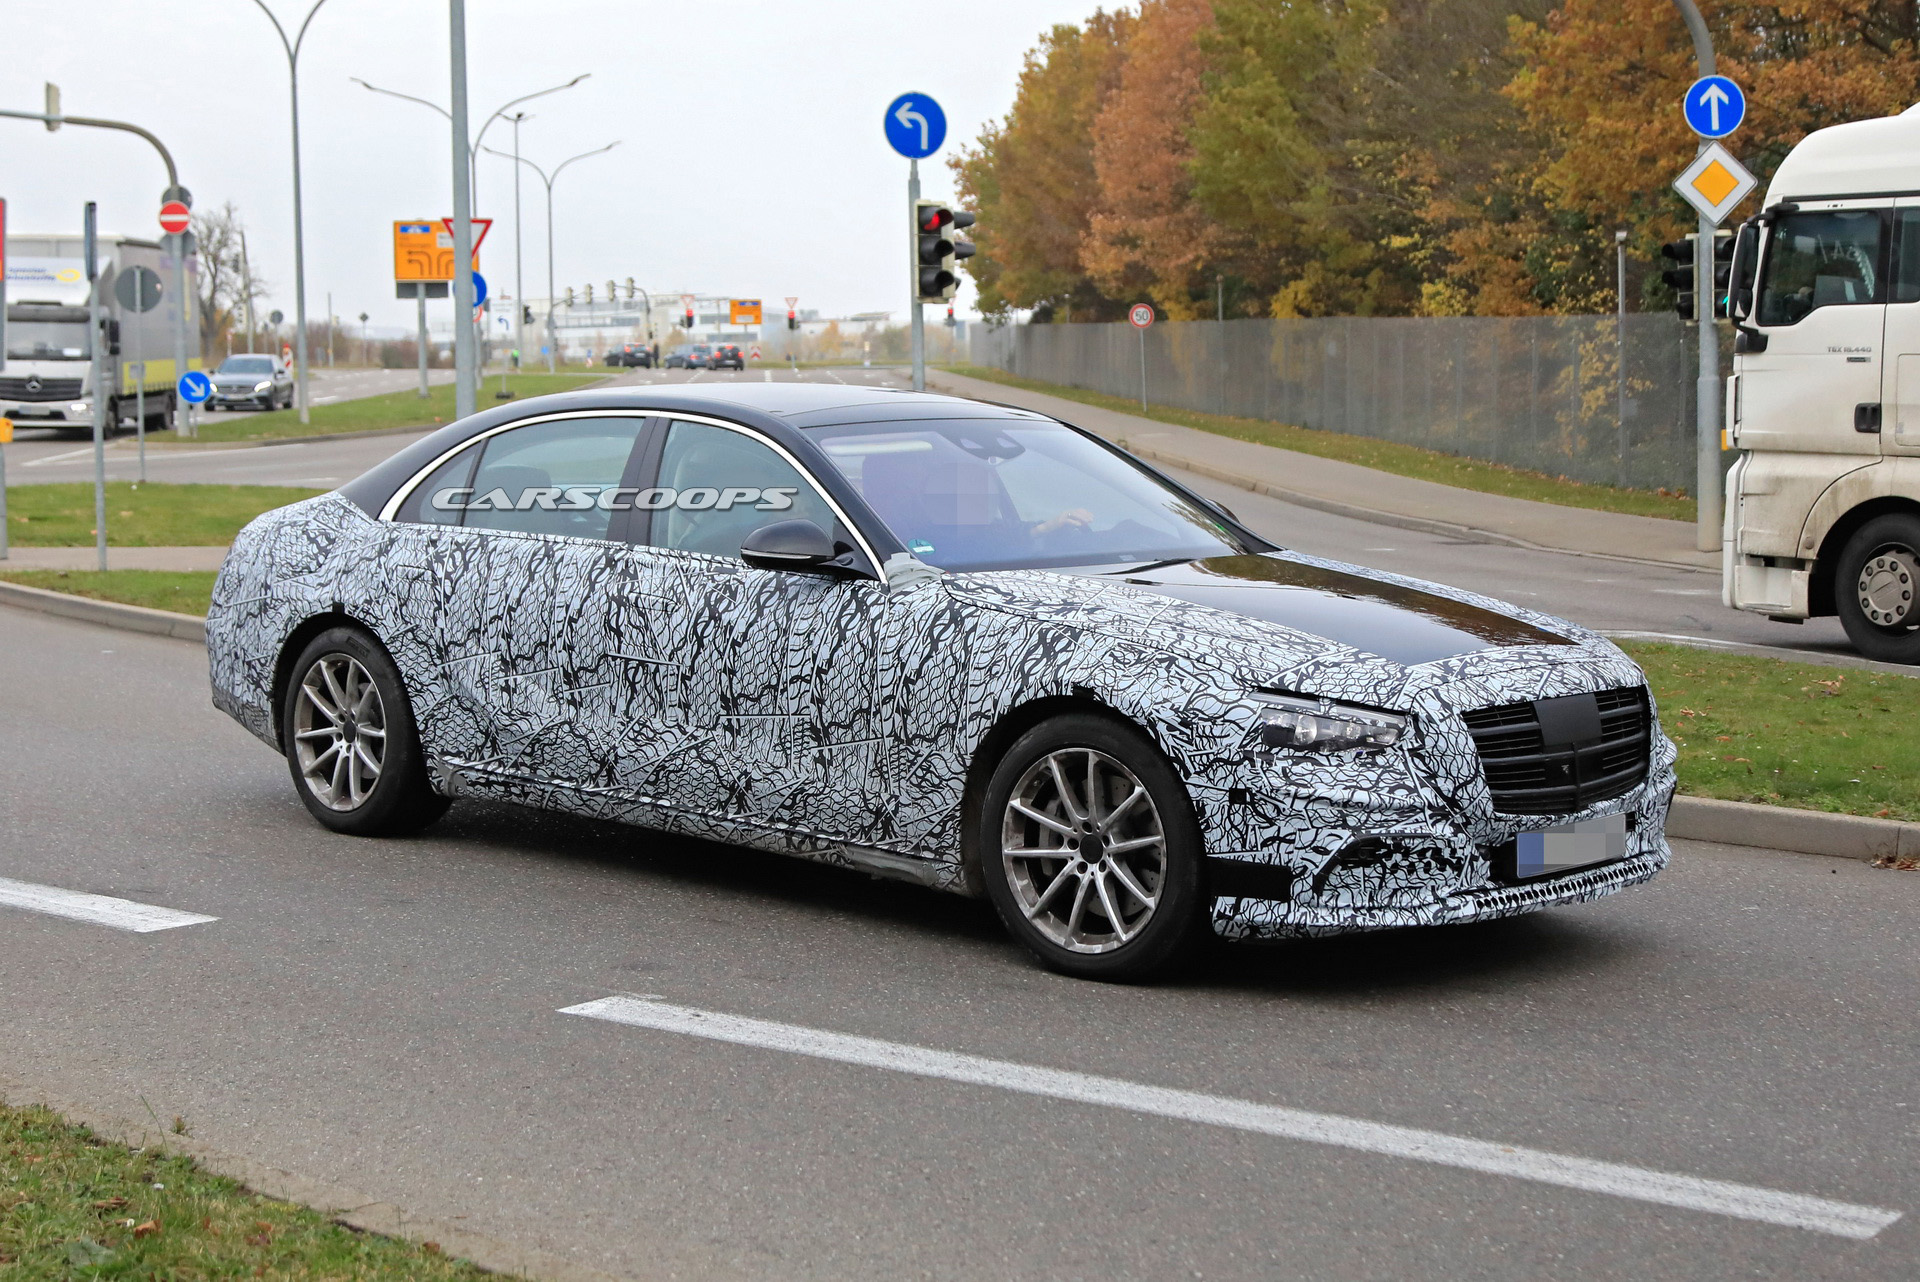 2021-mercedes-s-class-less-camouflage-5.